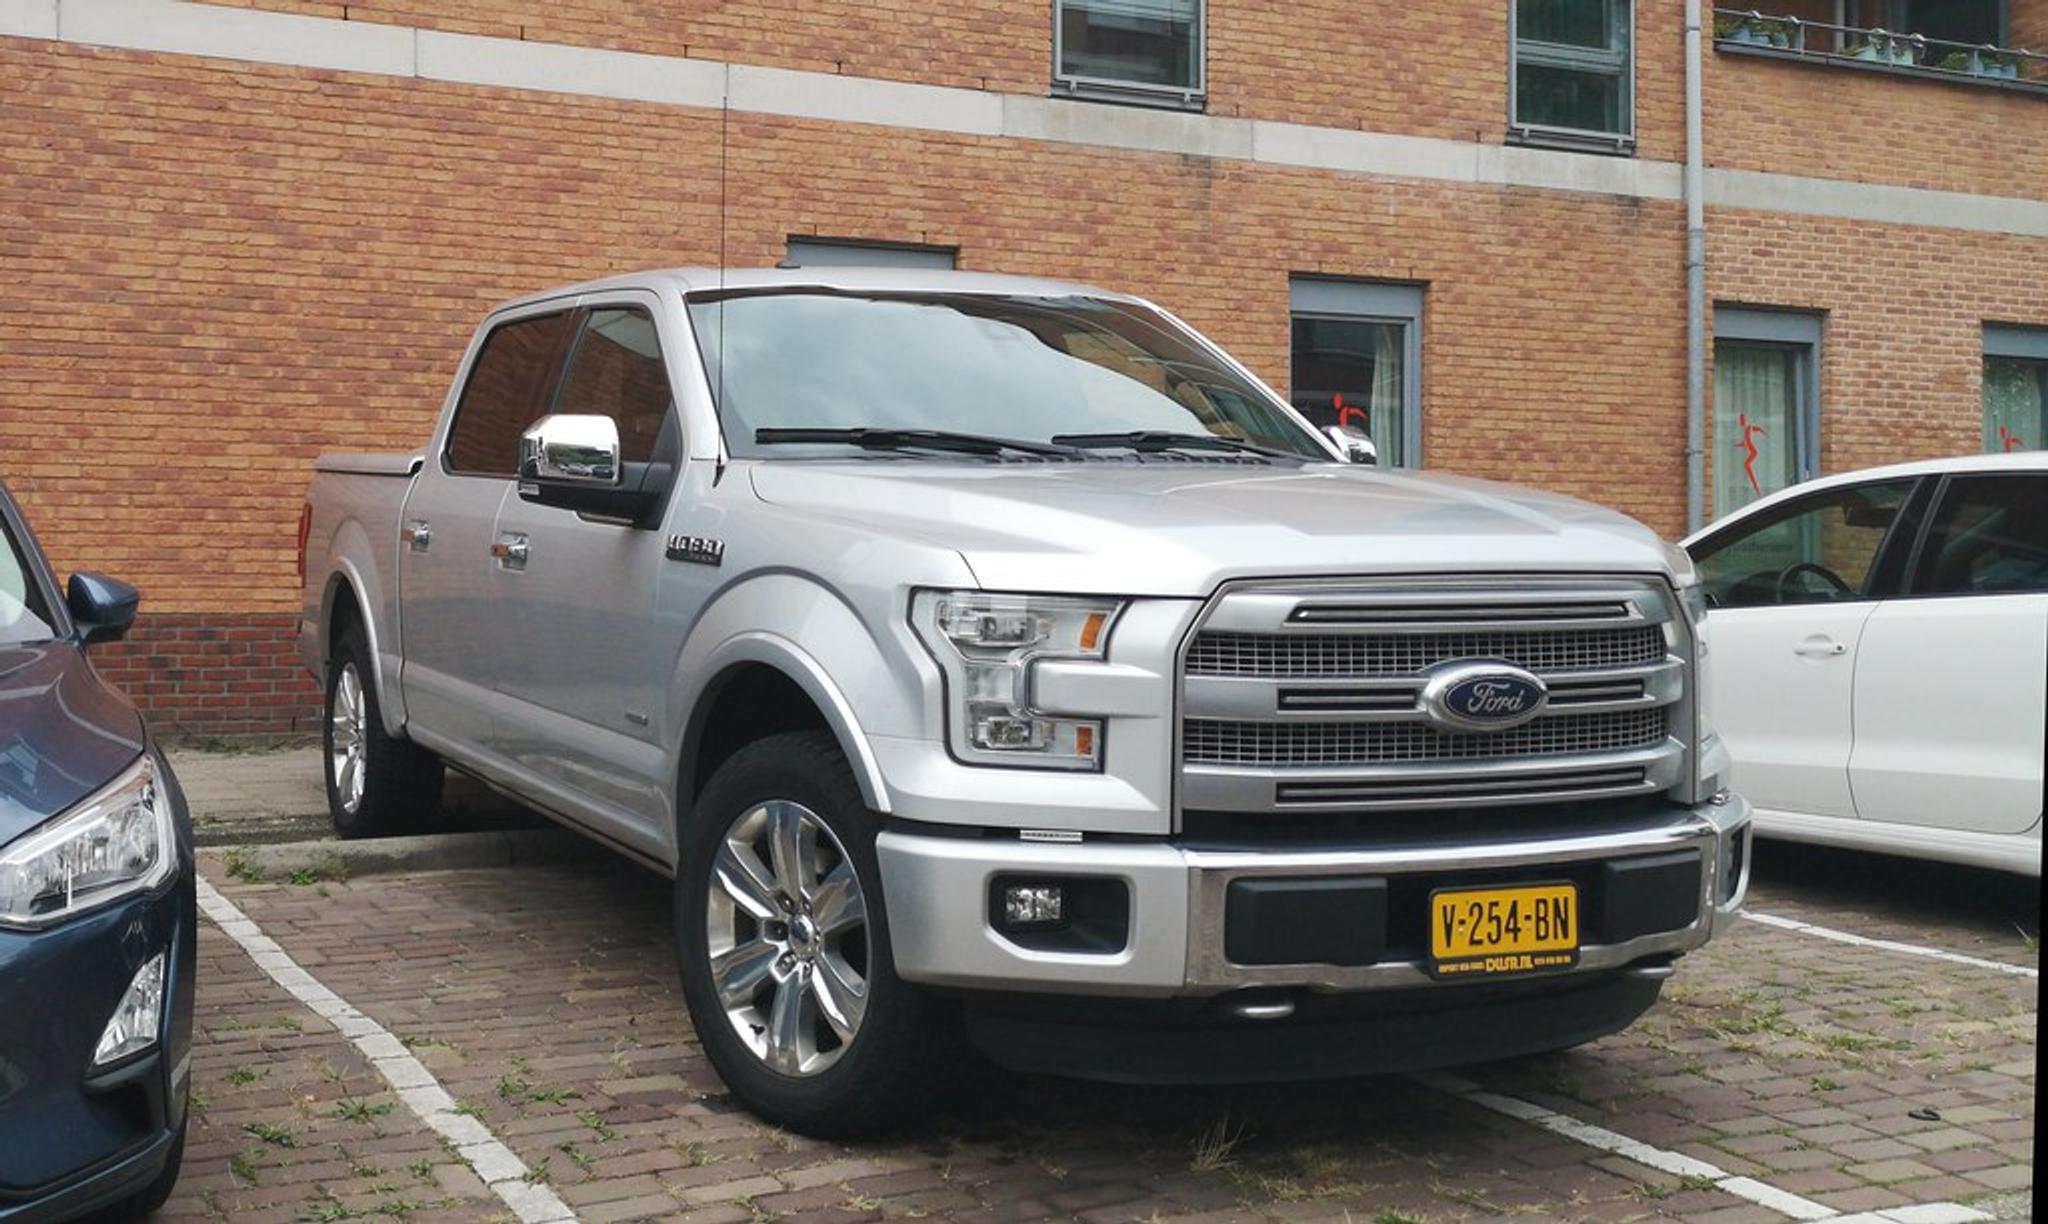 Silver Ford F-Series pickup truck